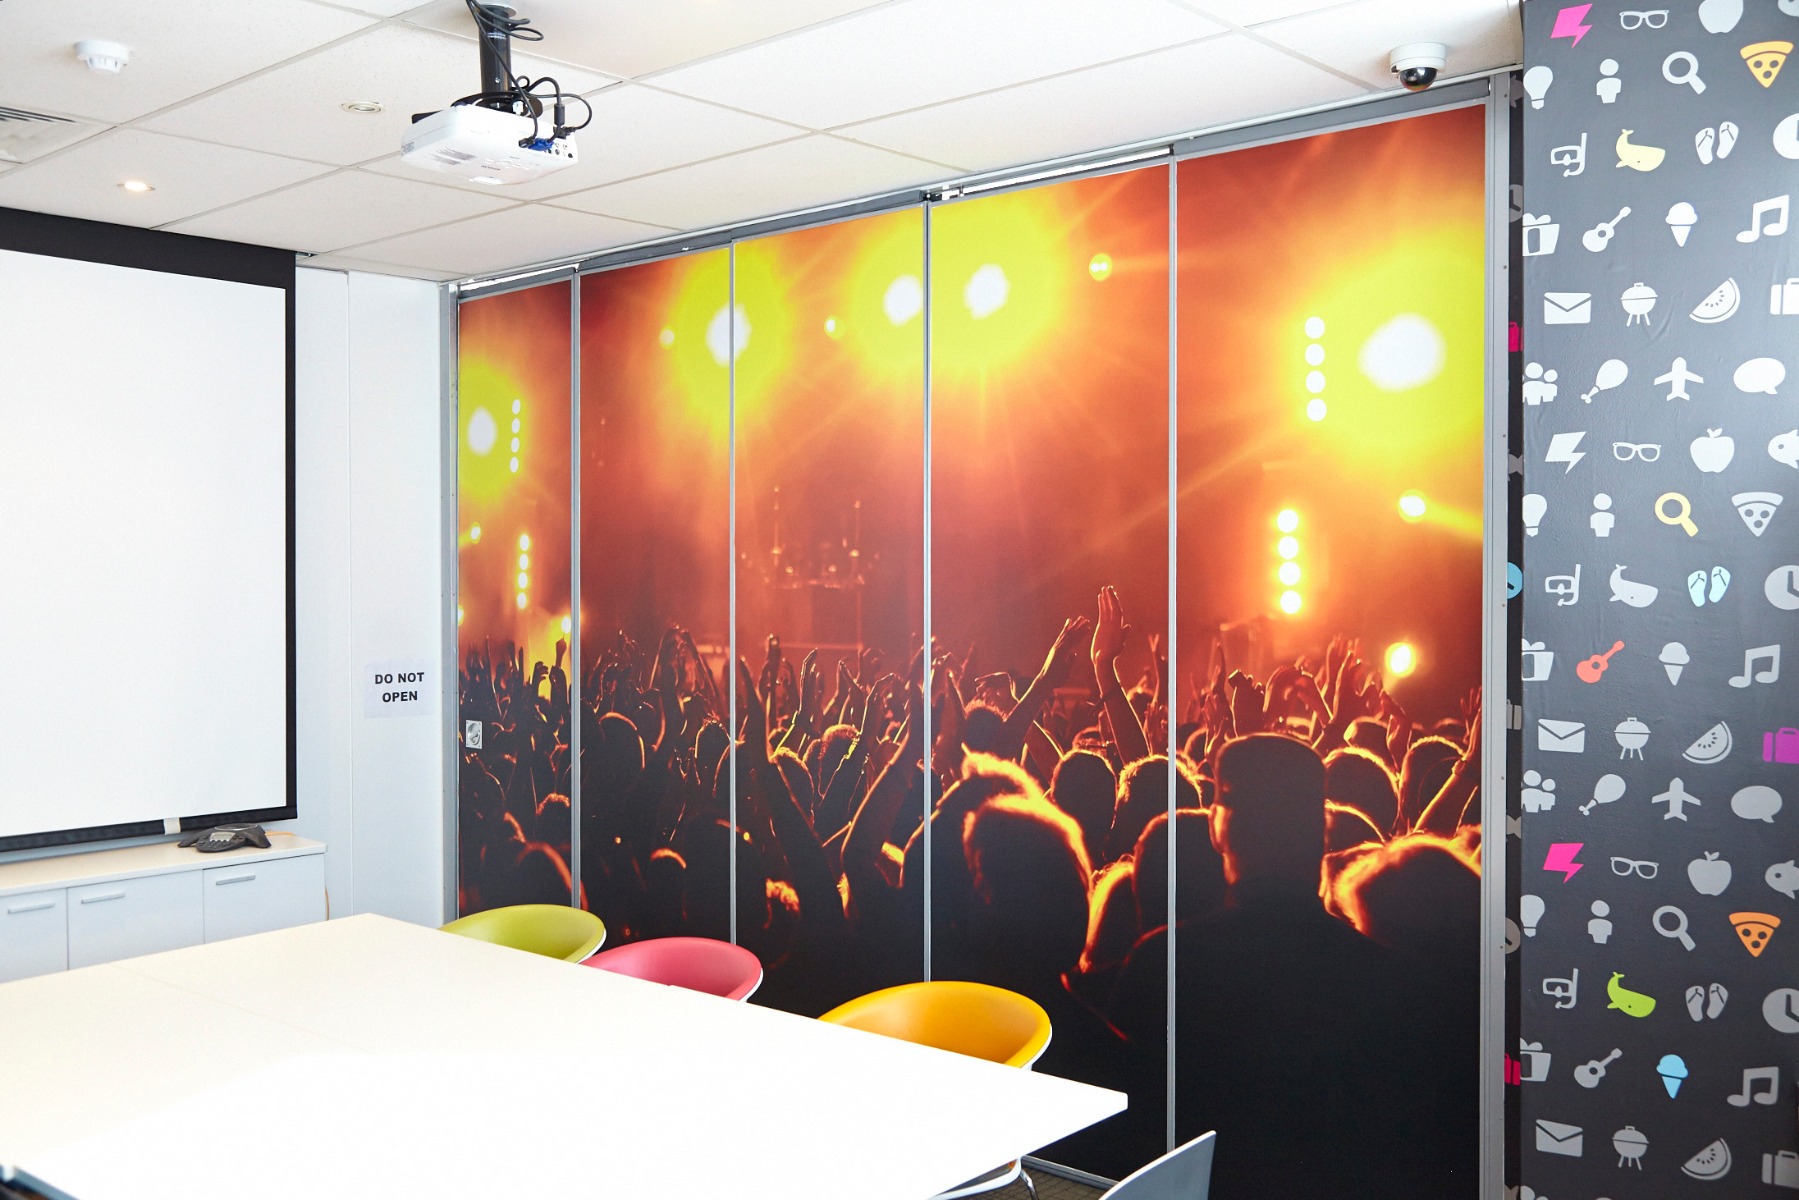 Media room in Sydney CBD office with removable wallpaper